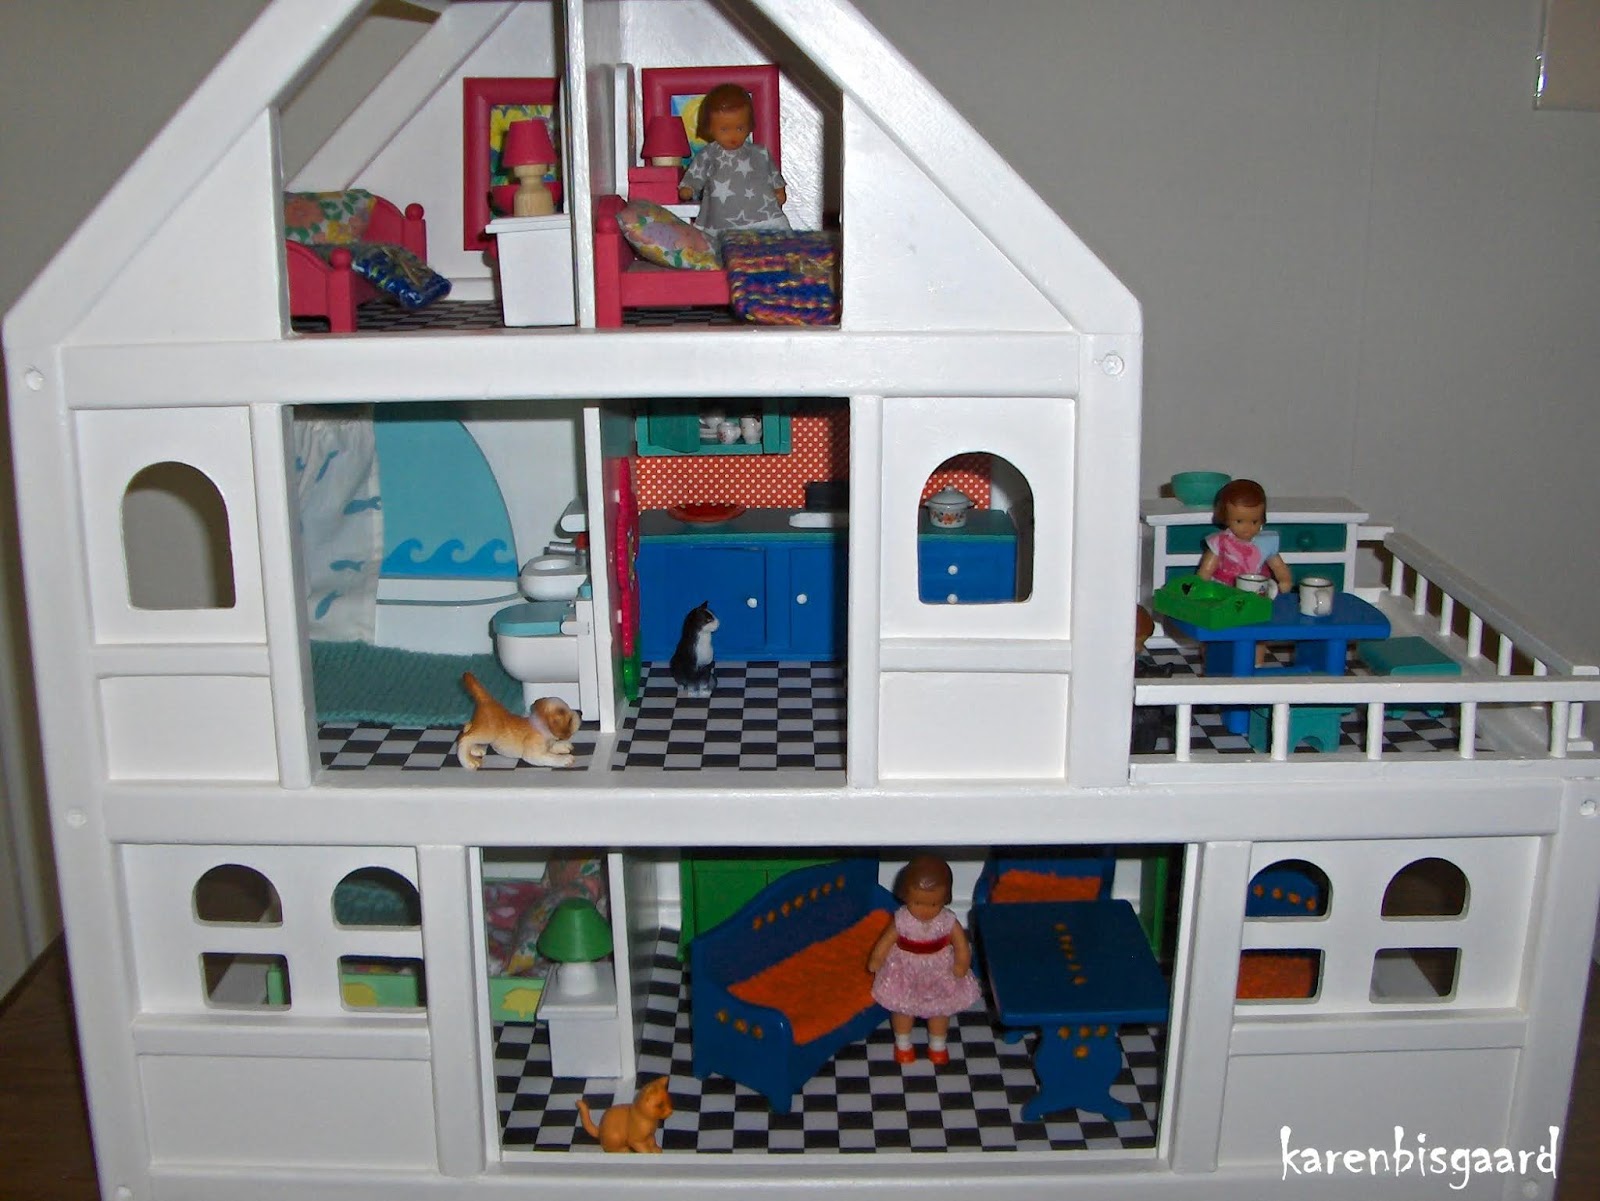 Link to: My Home Dollhouse scenes.